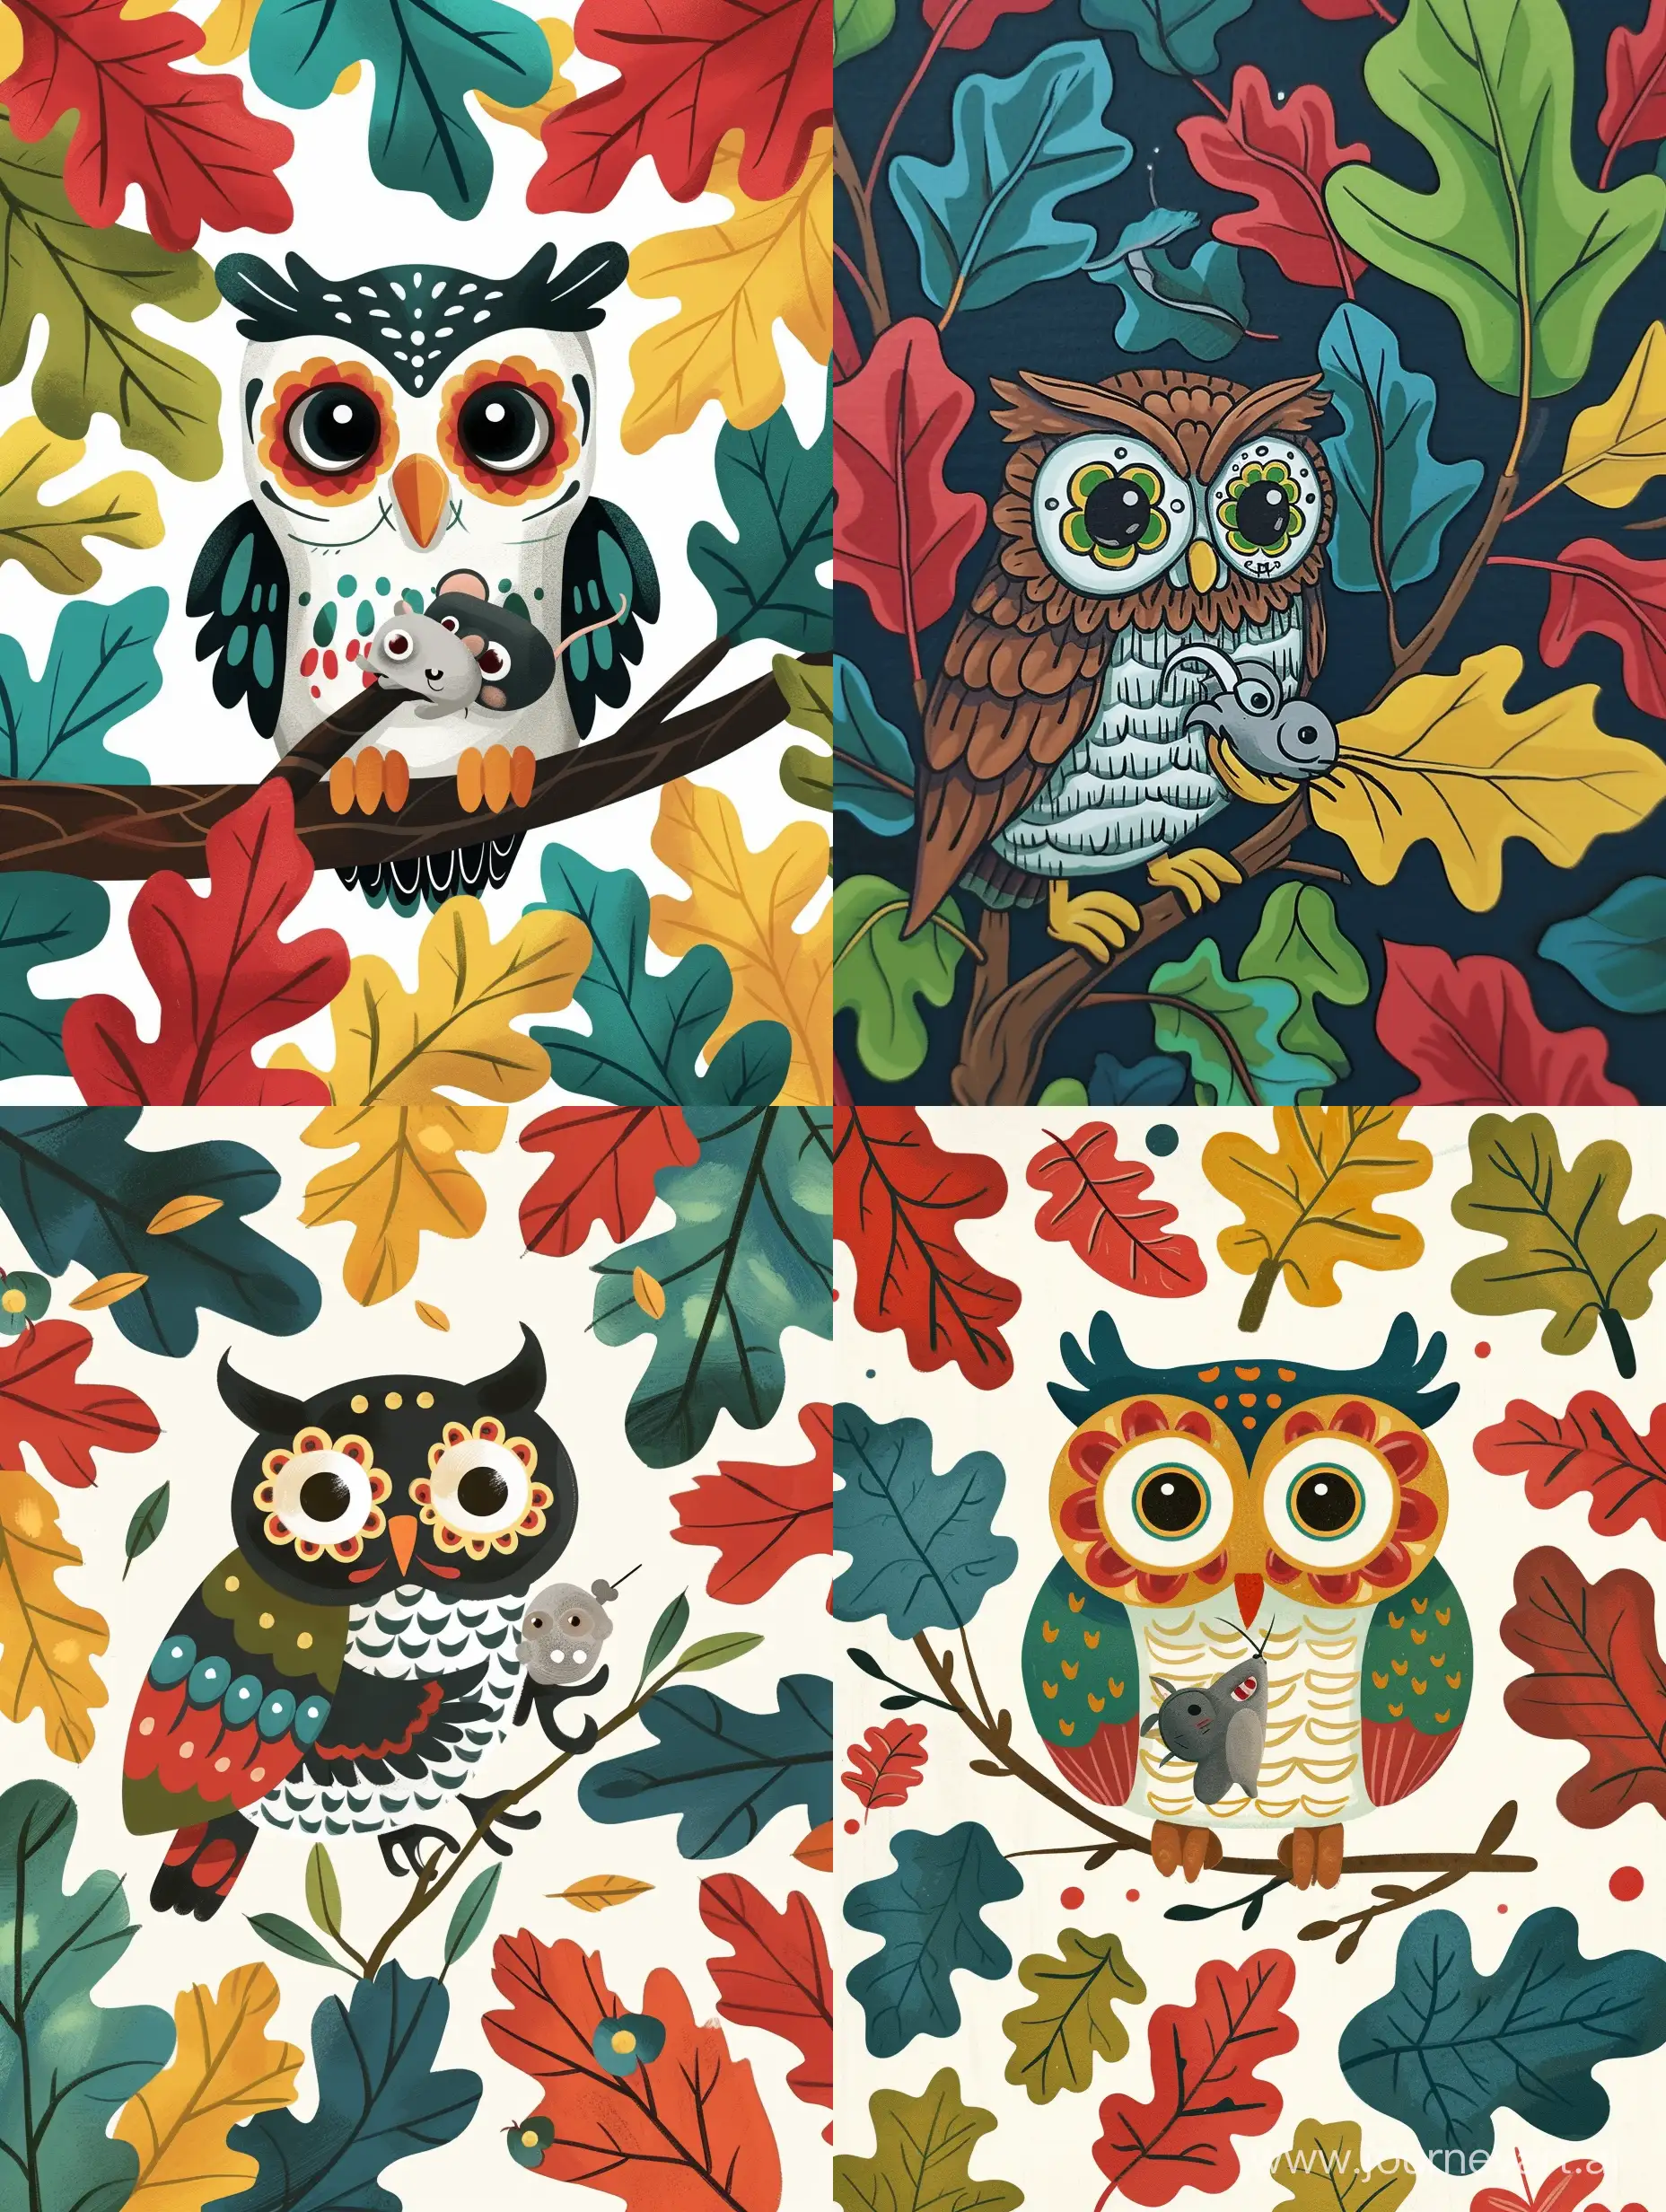 Little owl among oak leaves holding mouse in his claw Dias de los muertos Kawaii White background blue green red yellow black colors